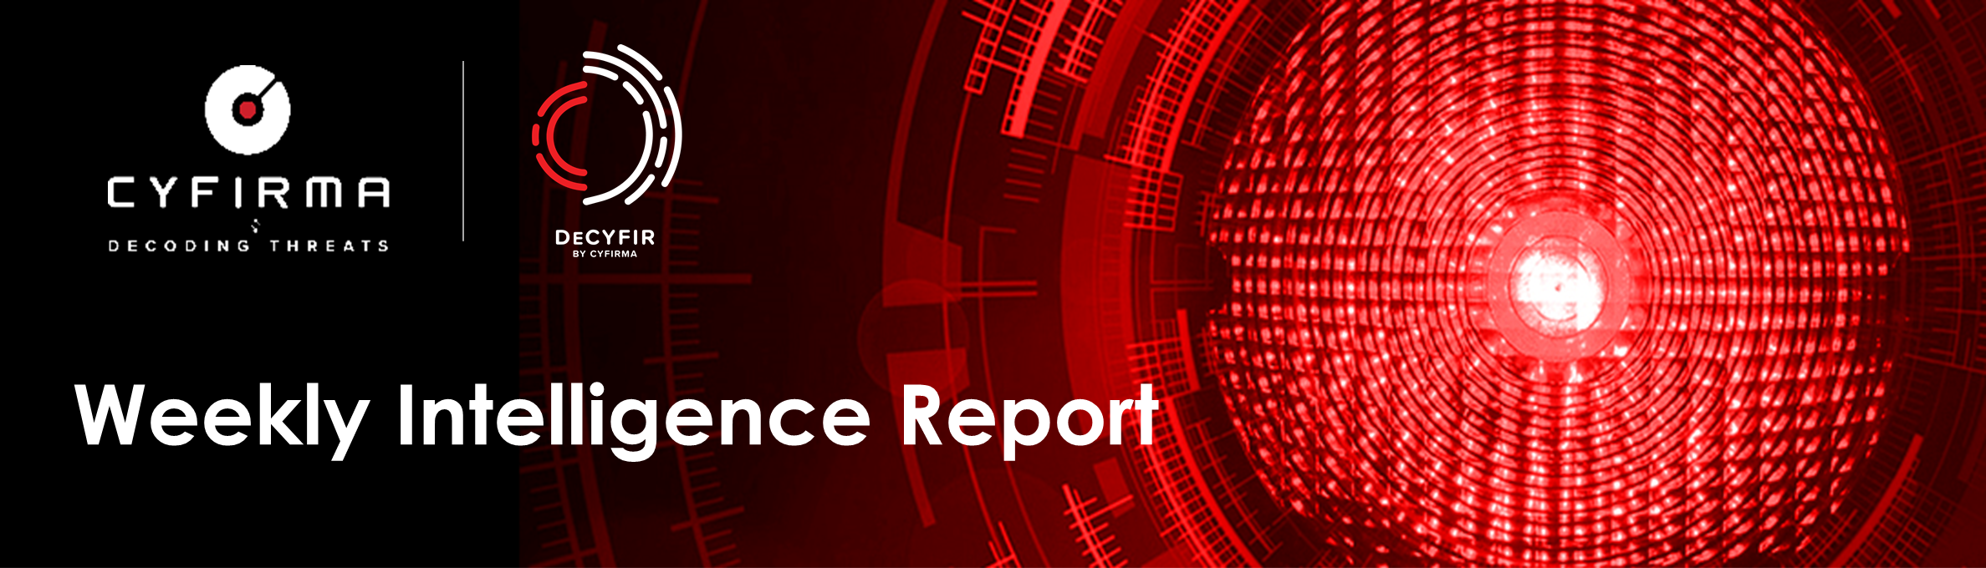 Weekly Cyber-Intelligence Report – 2 May 2021